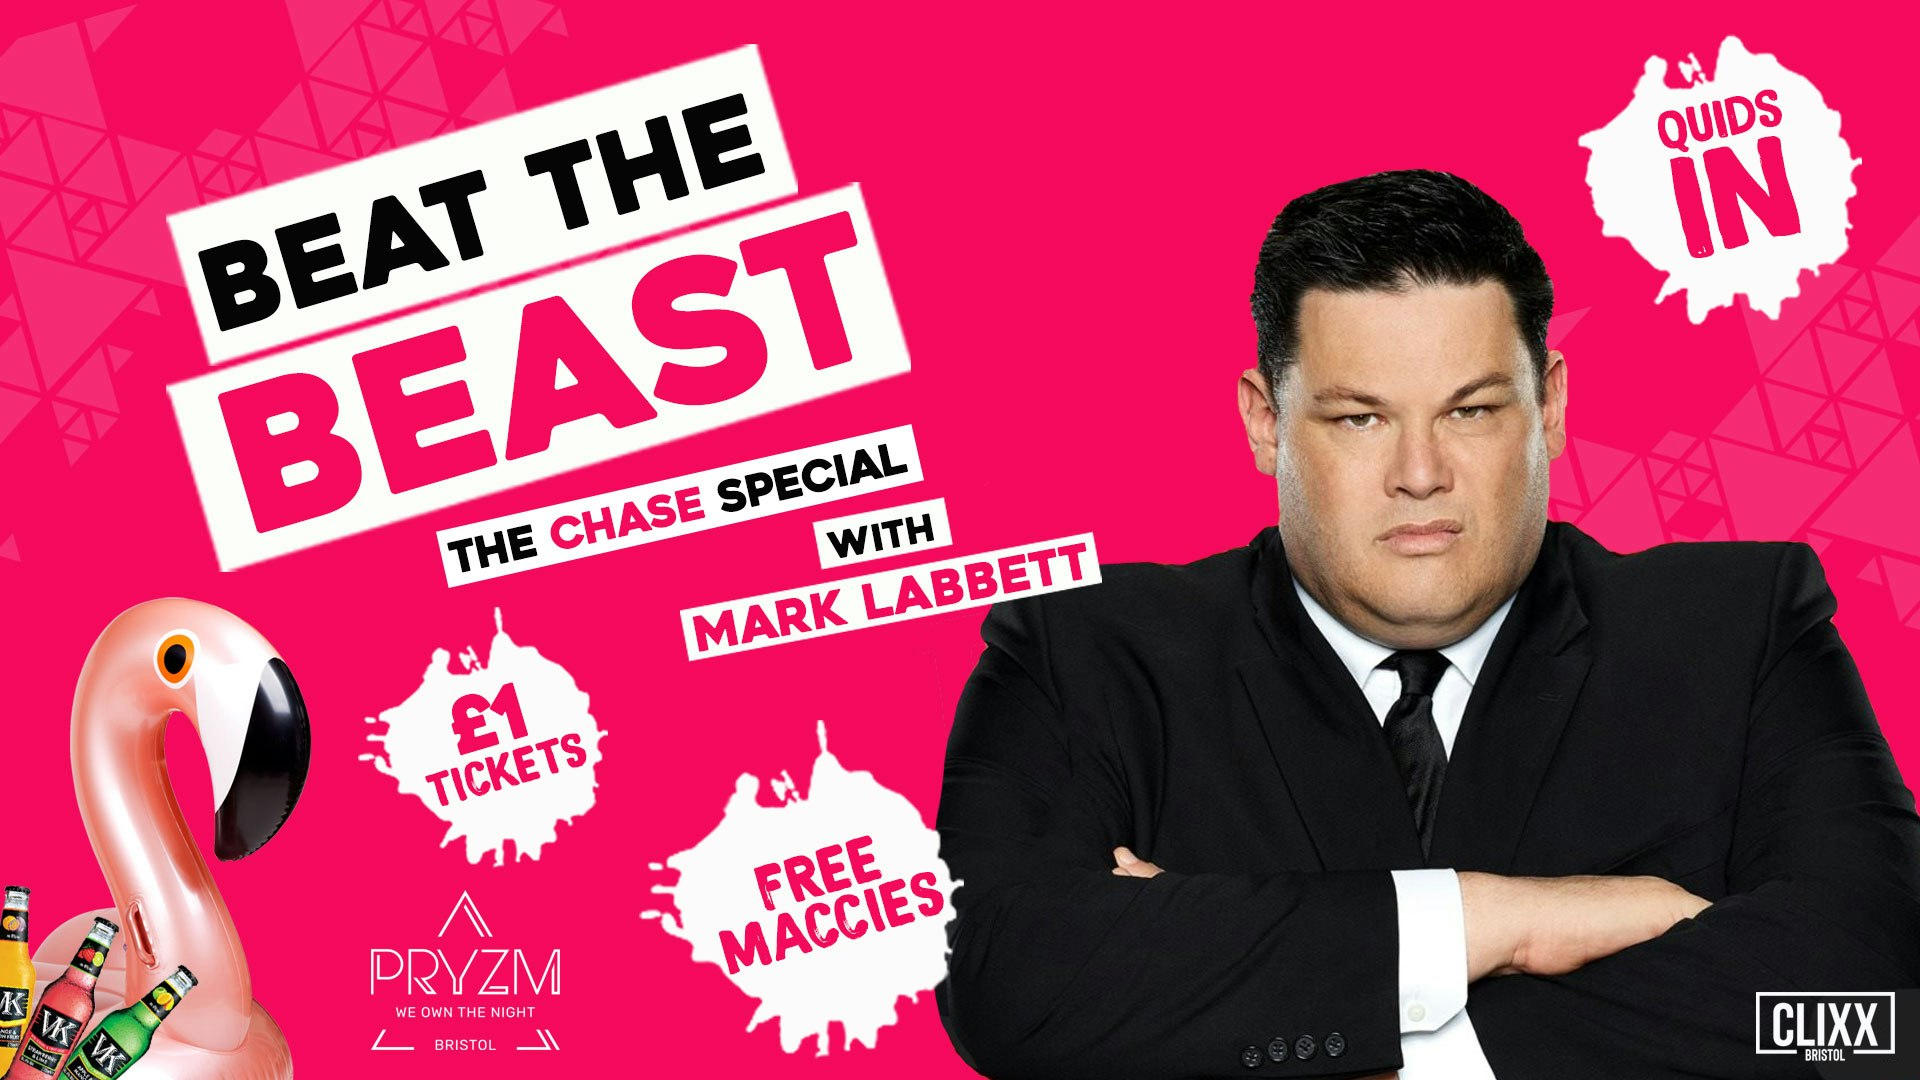 QUIDS IN w/ The Beast (The Chase) – £1 Tickets